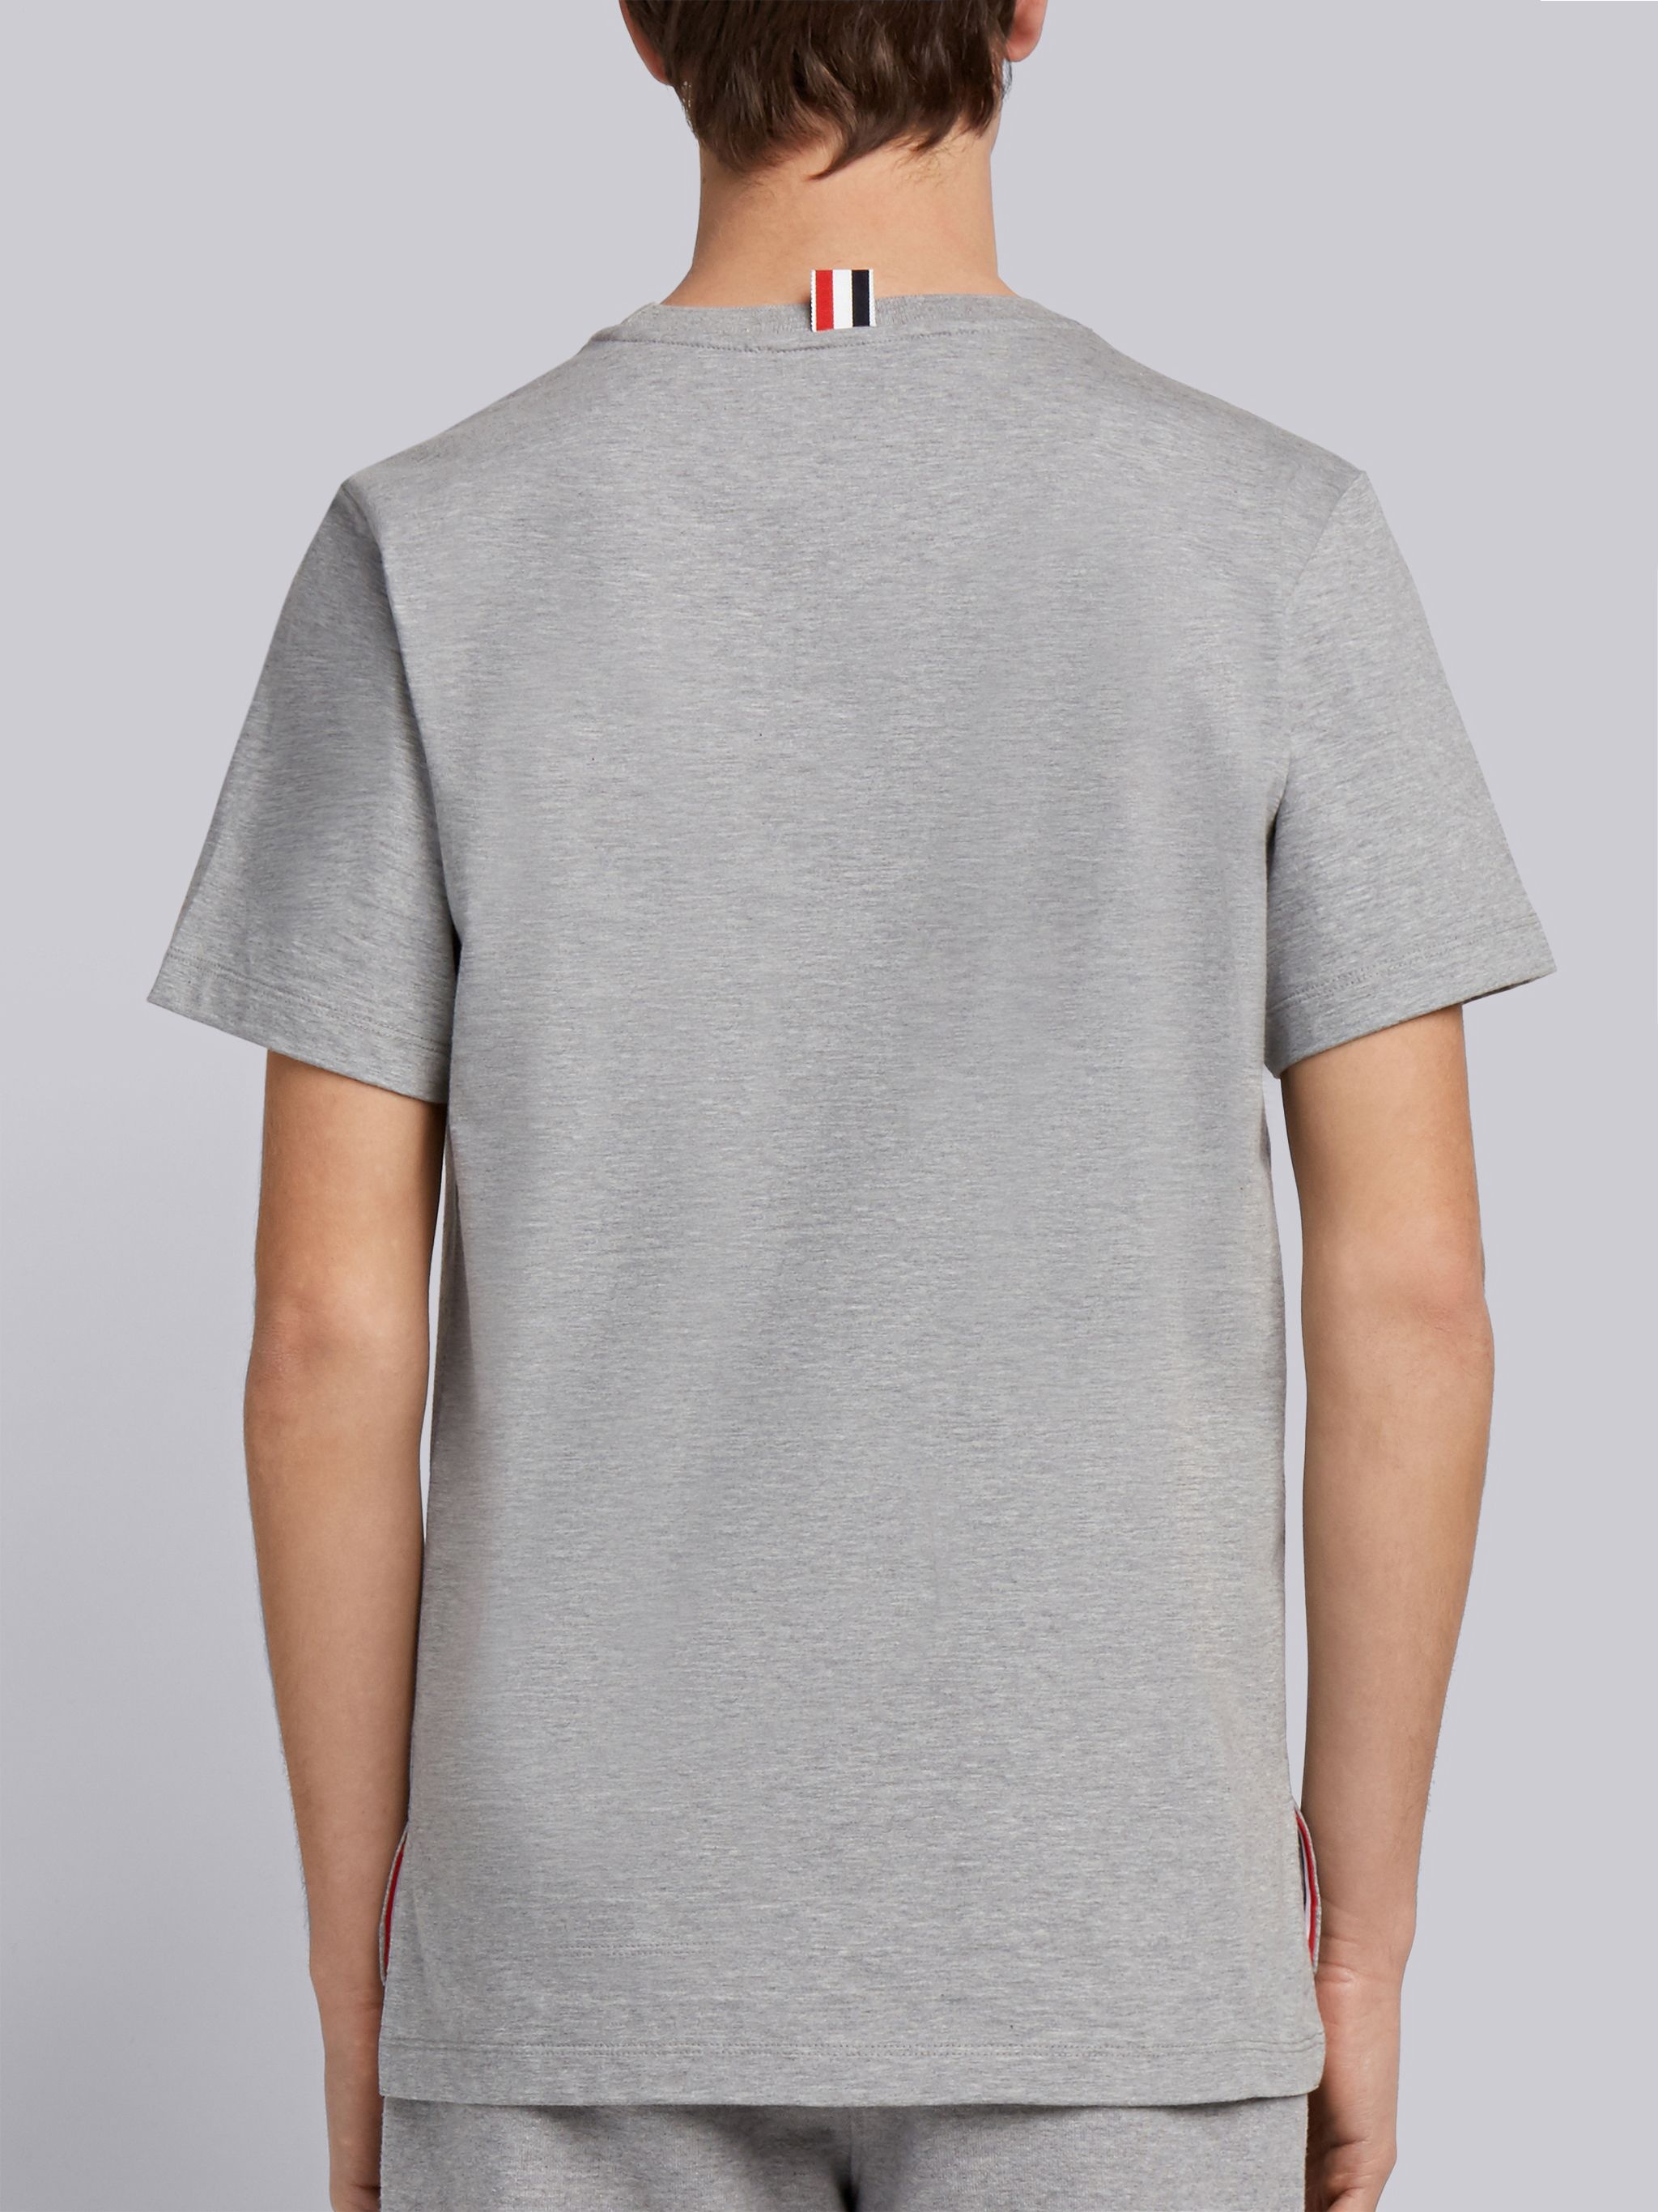 Light Grey Medium Weight Jersey Side Slit Relaxed Fit Tee - 3